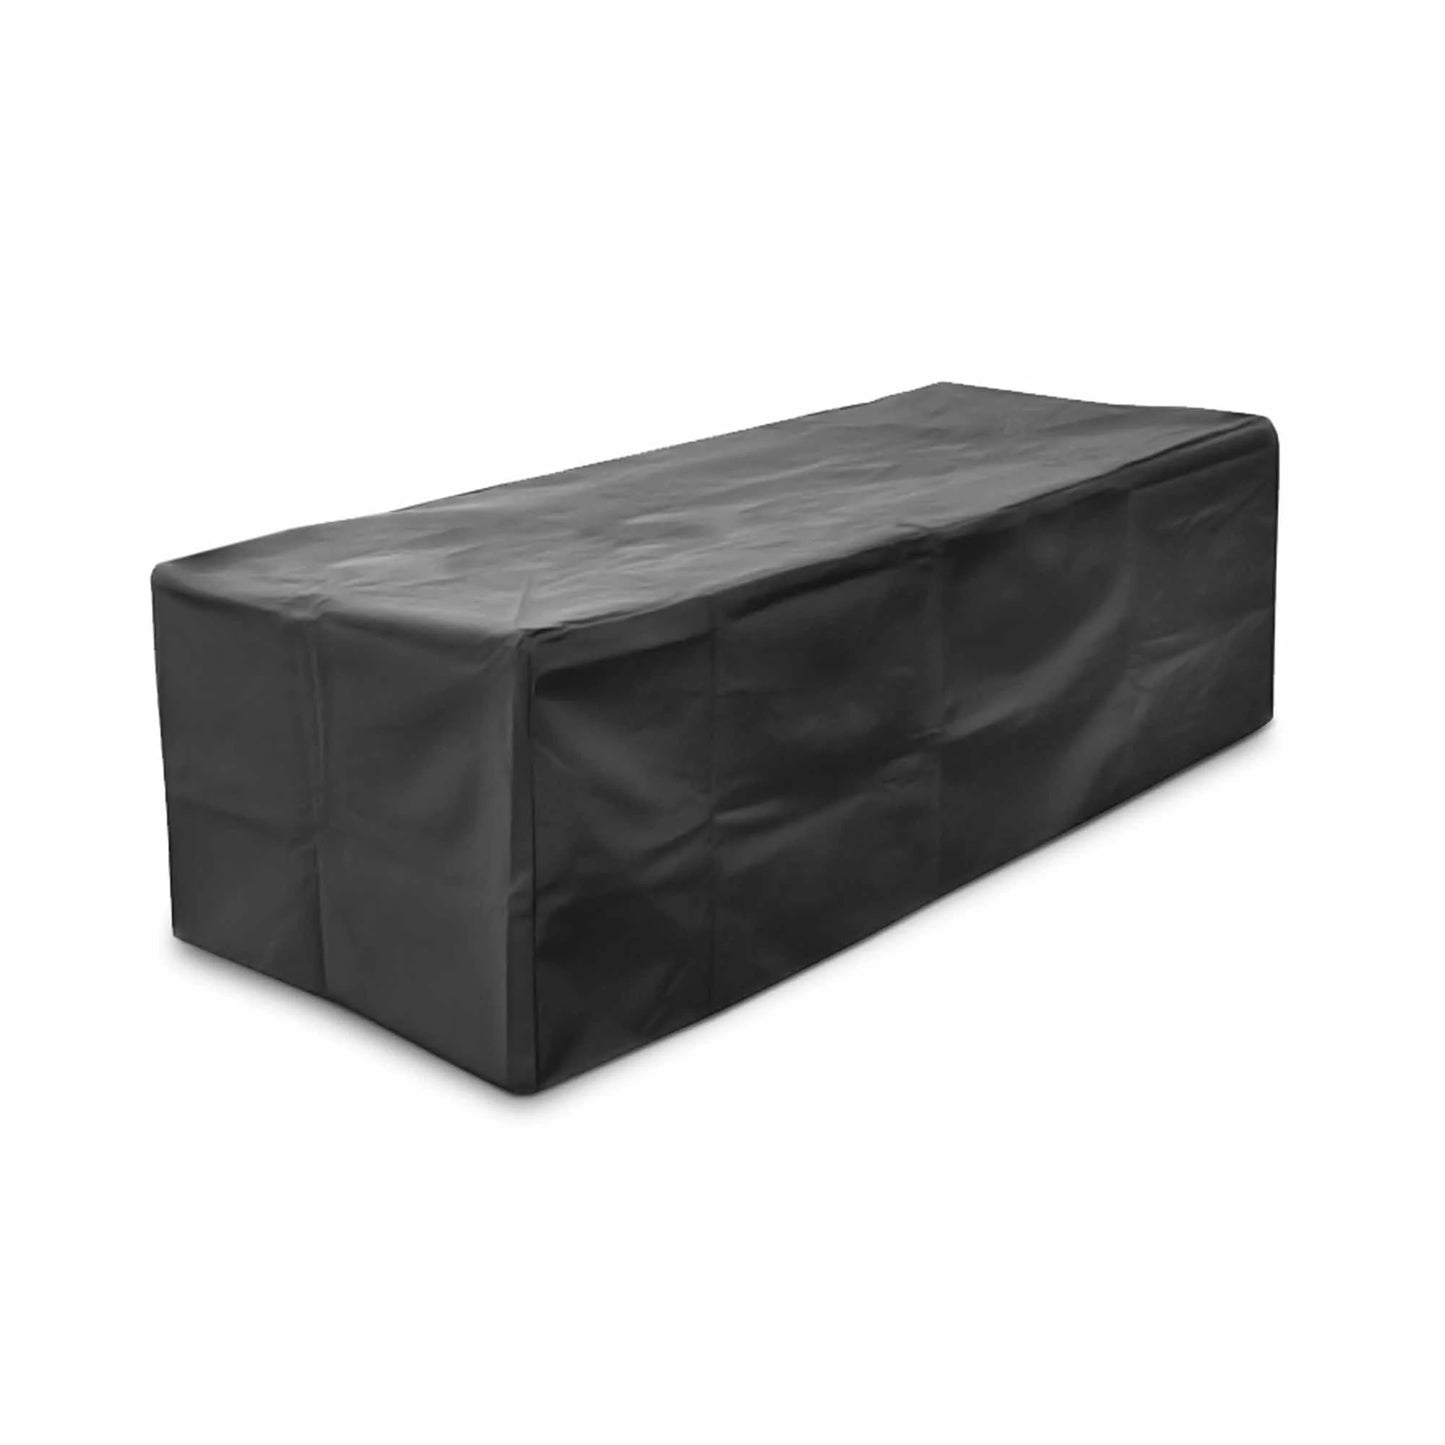 The Outdoor Plus Rectangular Canvas Cover